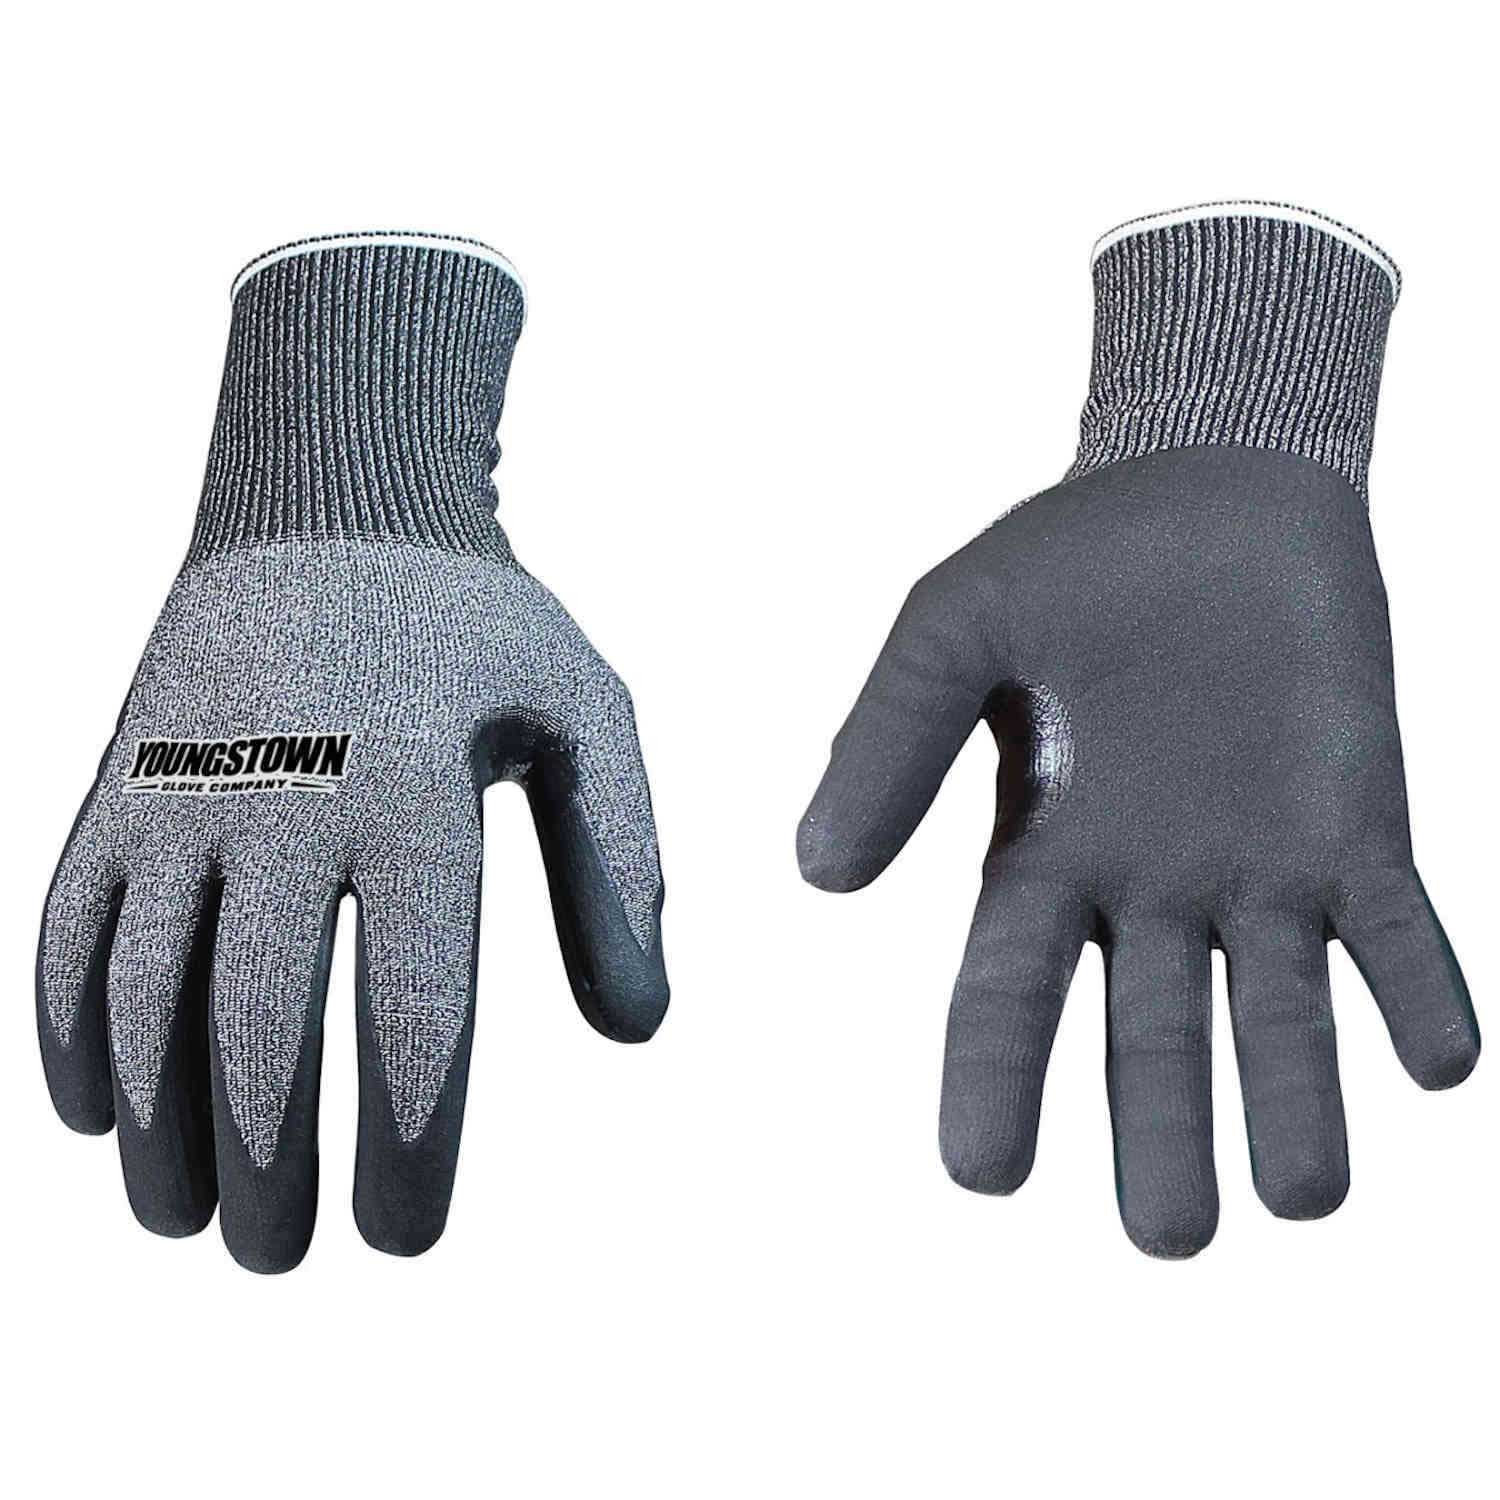 Youngstown Glove CRD15 Cut Resistant Glove